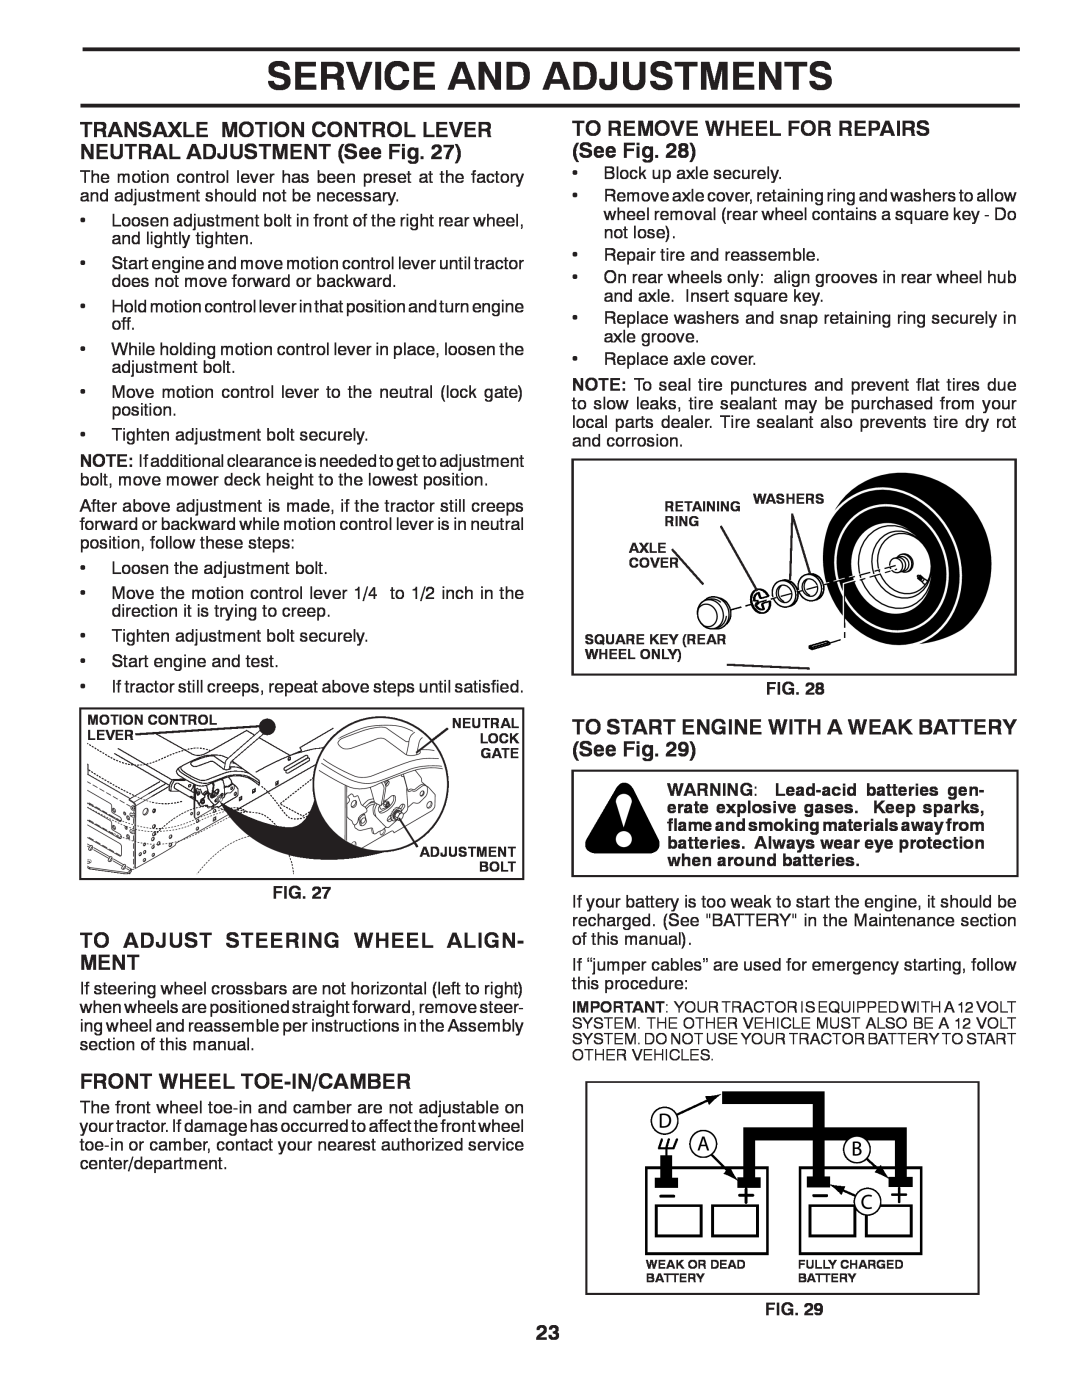 Poulan 411287 manual To Adjust Steering Wheel Align- Ment, Front Wheel Toe-In/Camber, TO REMOVE WHEEL FOR REPAIRS See Fig 